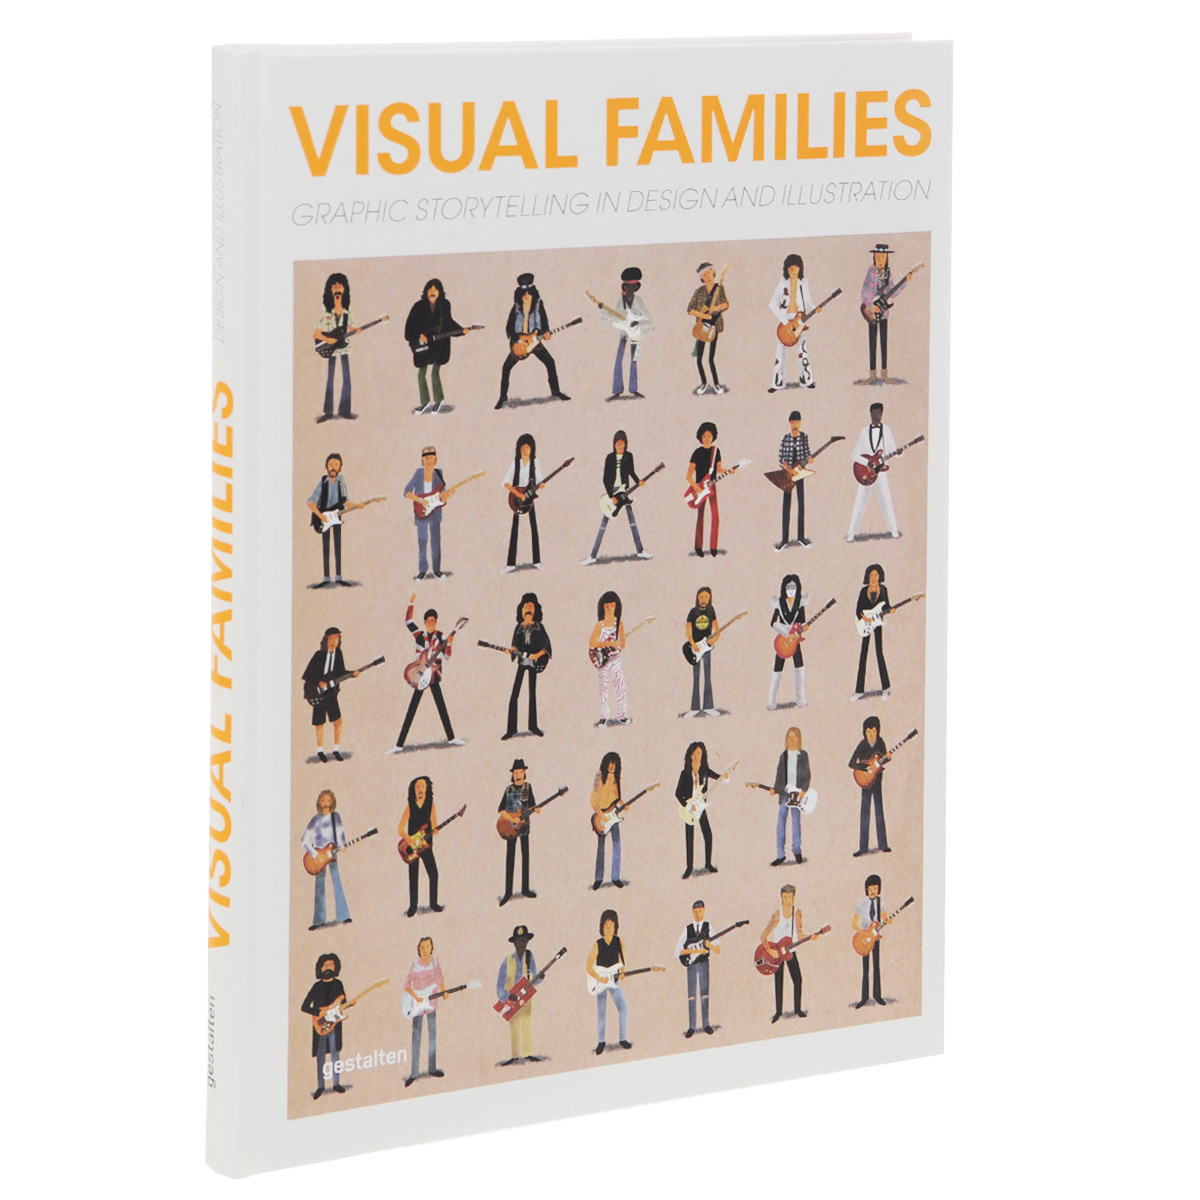 Visual Families: Graphic Storytelling in Design and Illustration